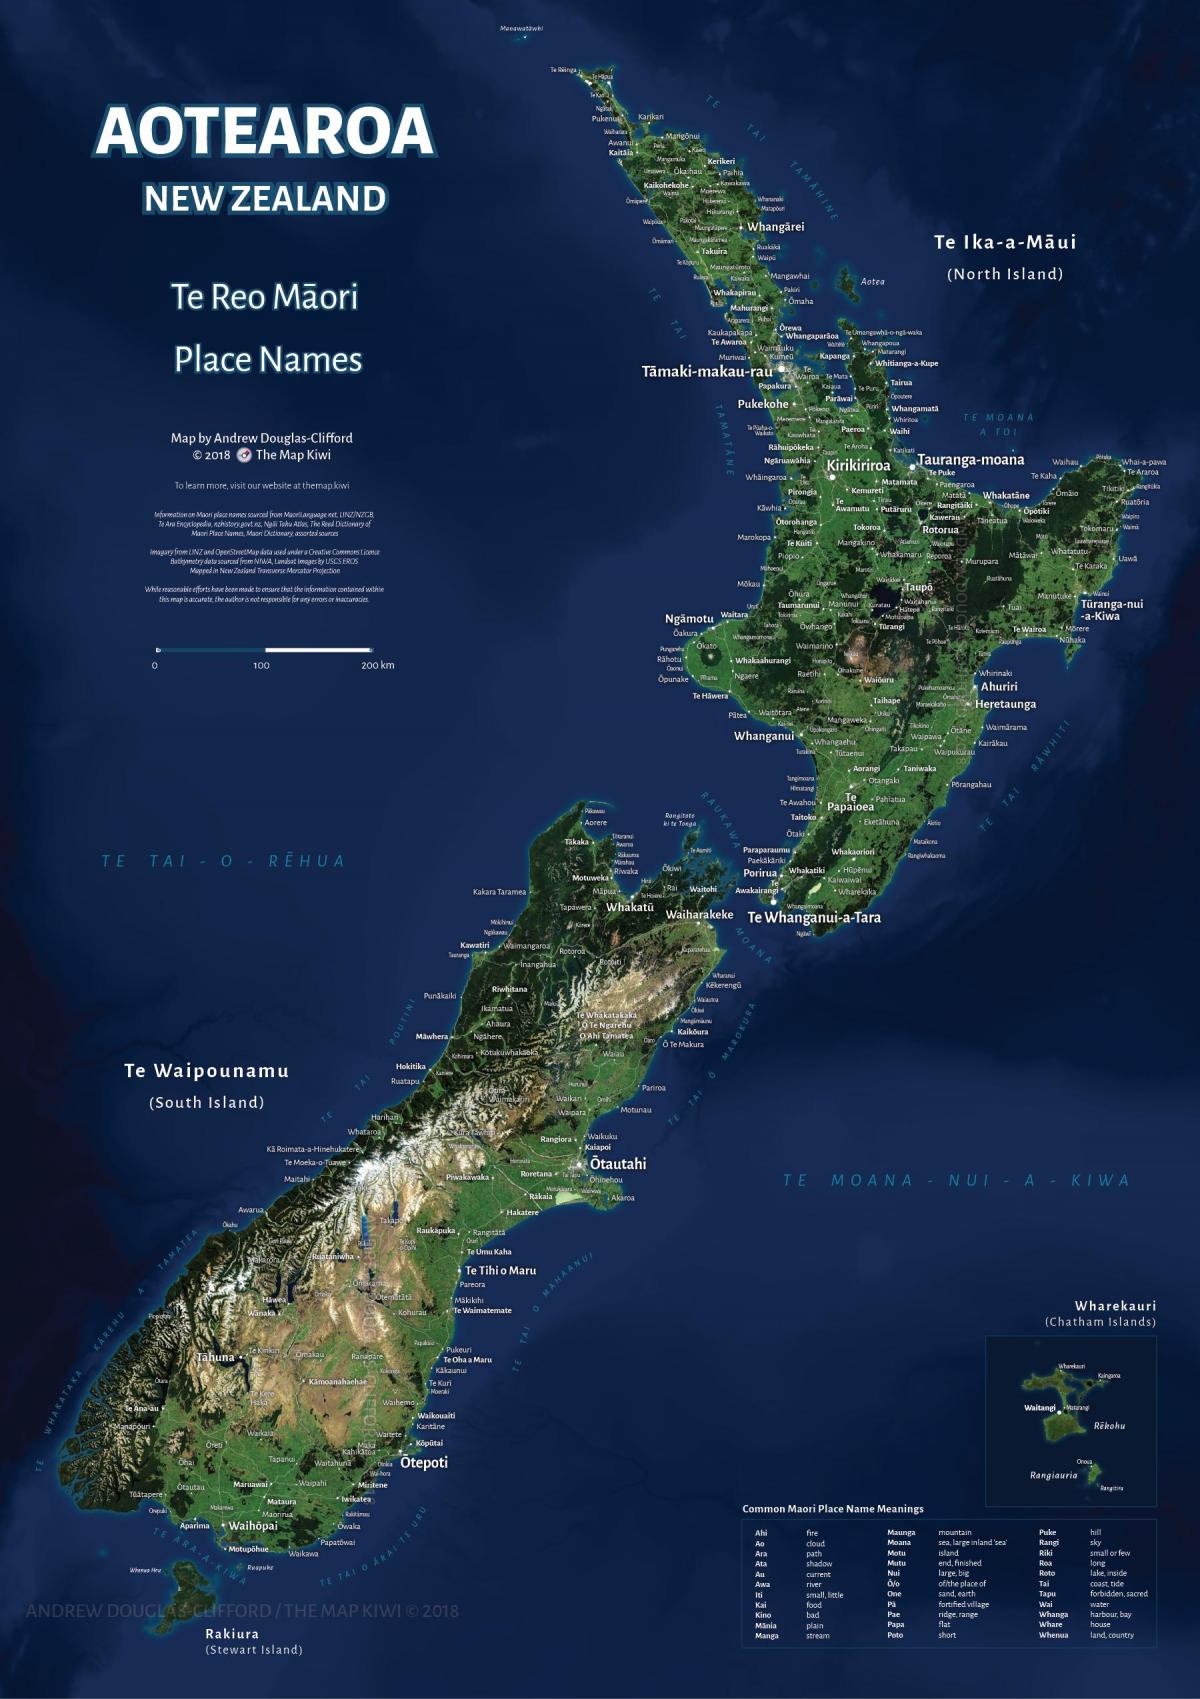 New Zealand sky view map